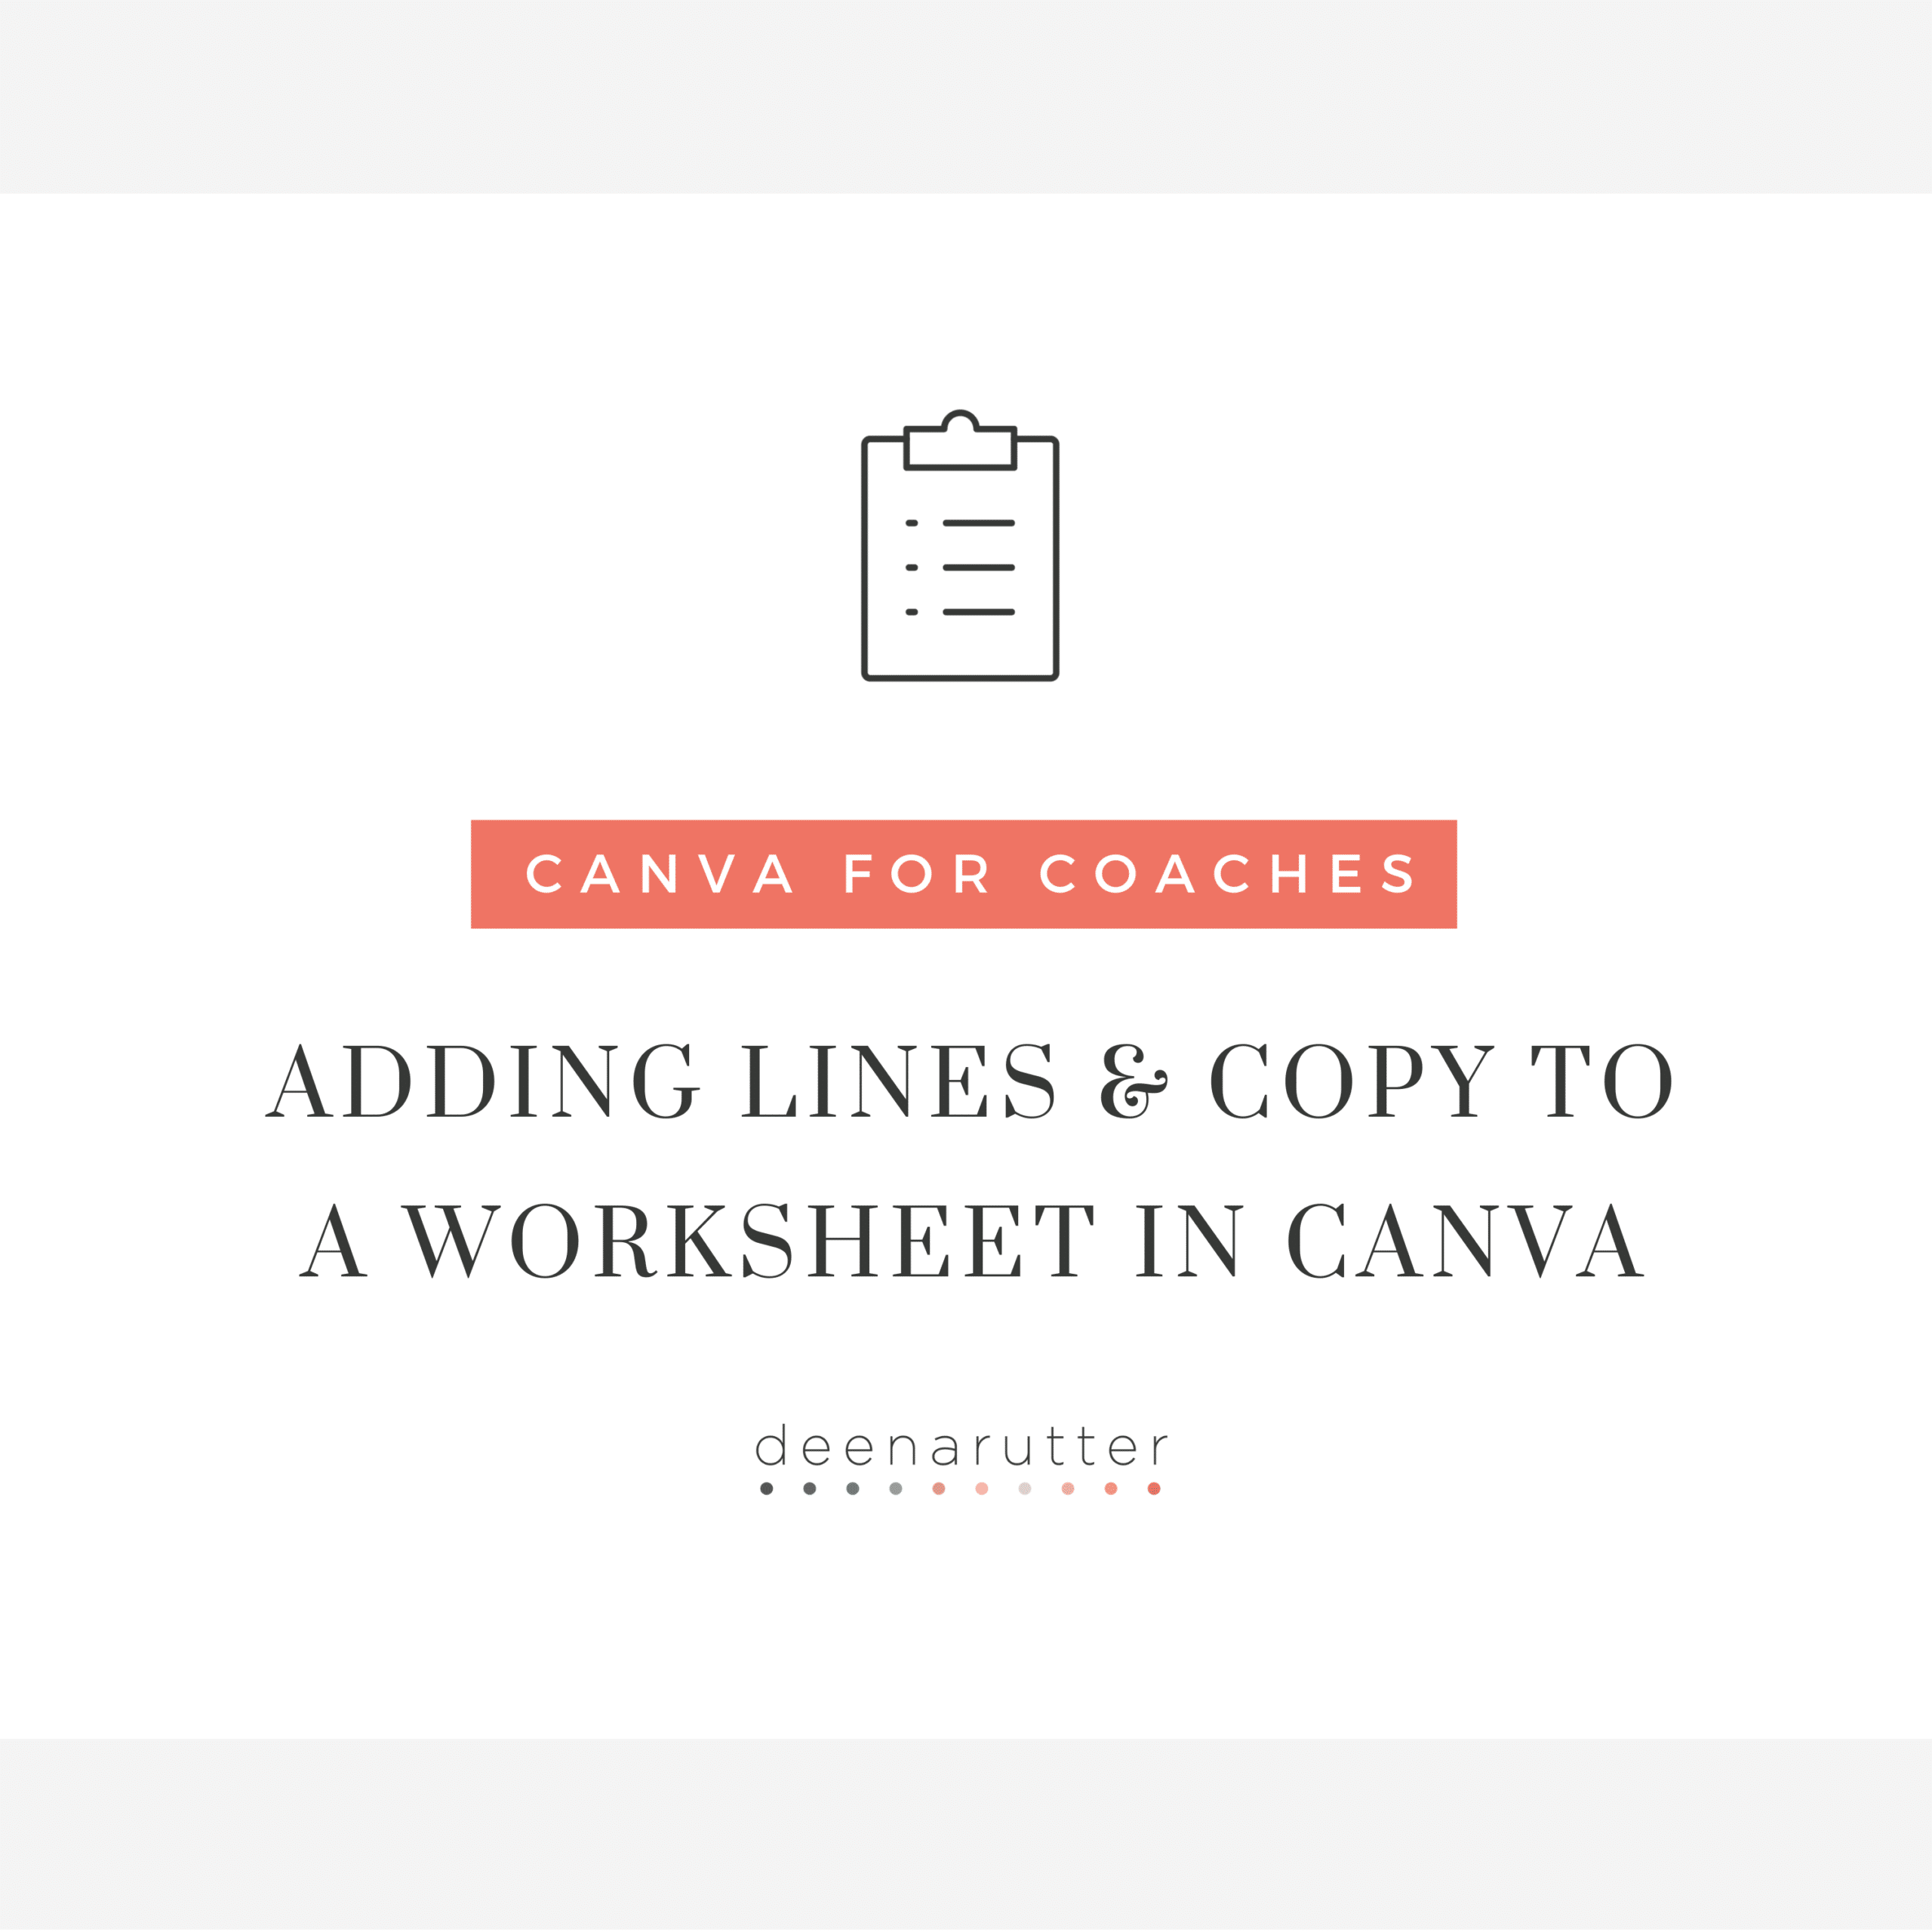 adding-lines-copy-to-a-worksheet-in-canva-deena-rutter